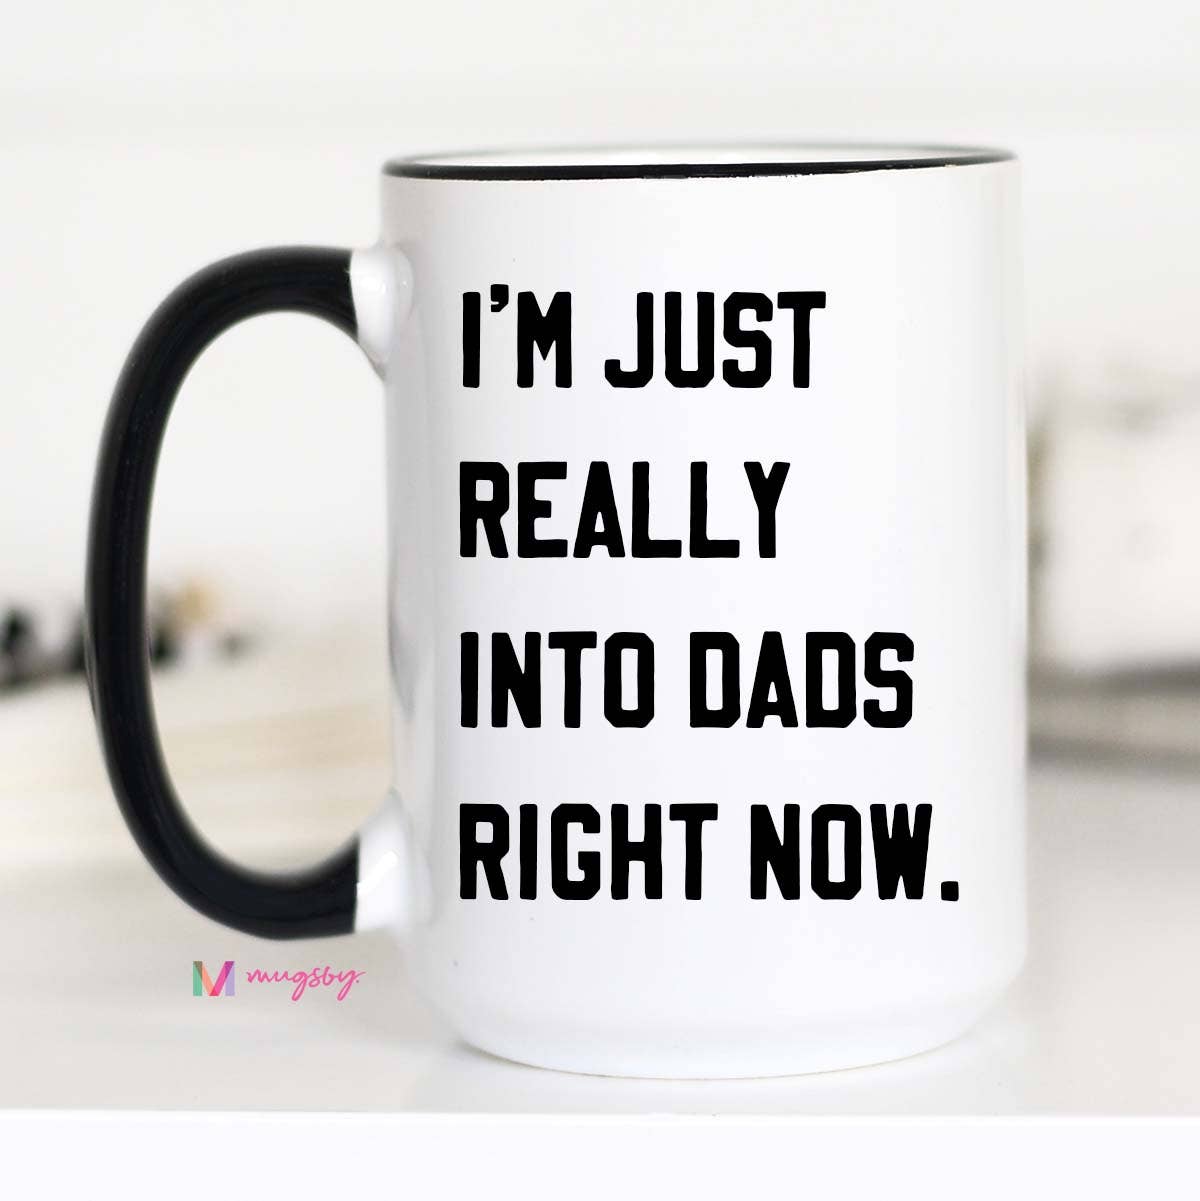 I'm Just Really into Dads Right Now Funny Coffee Mug - 15 oz